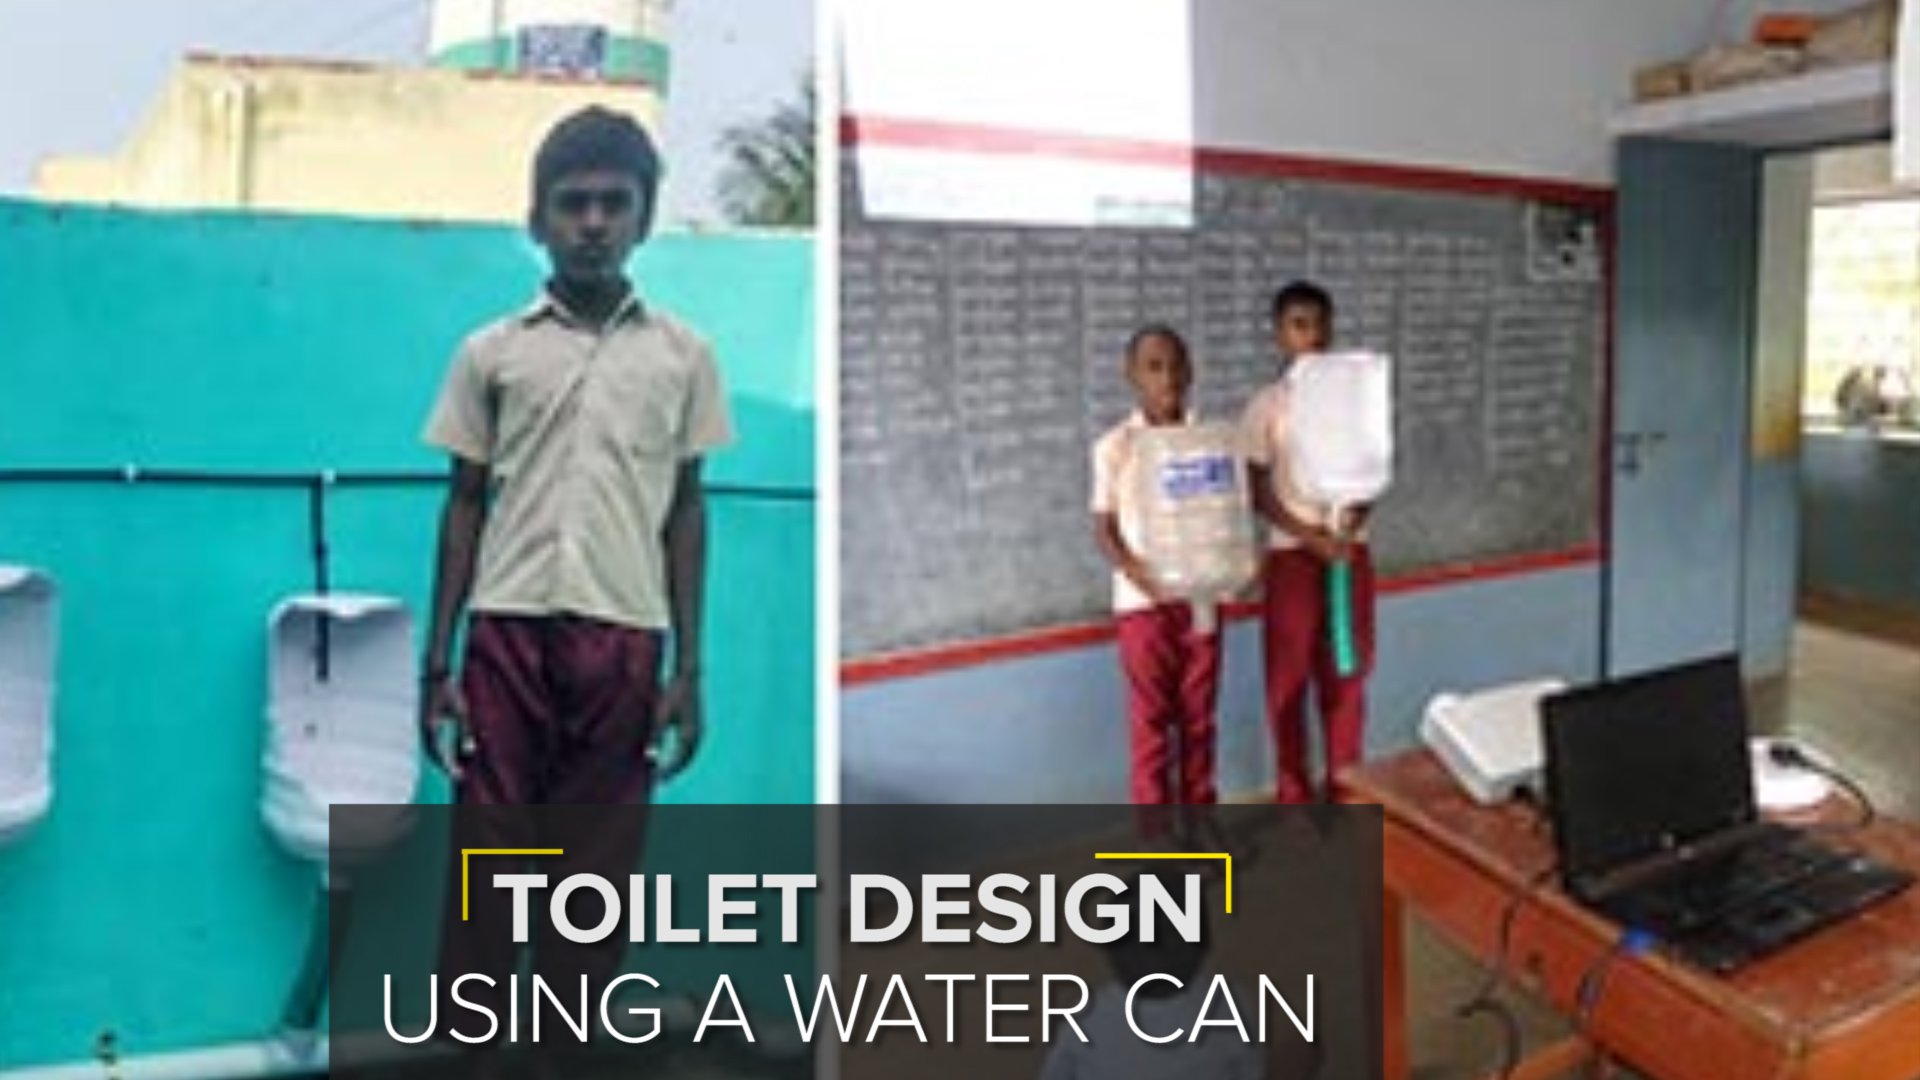 VIDEO: Student Designs a Toilet using Water Cans